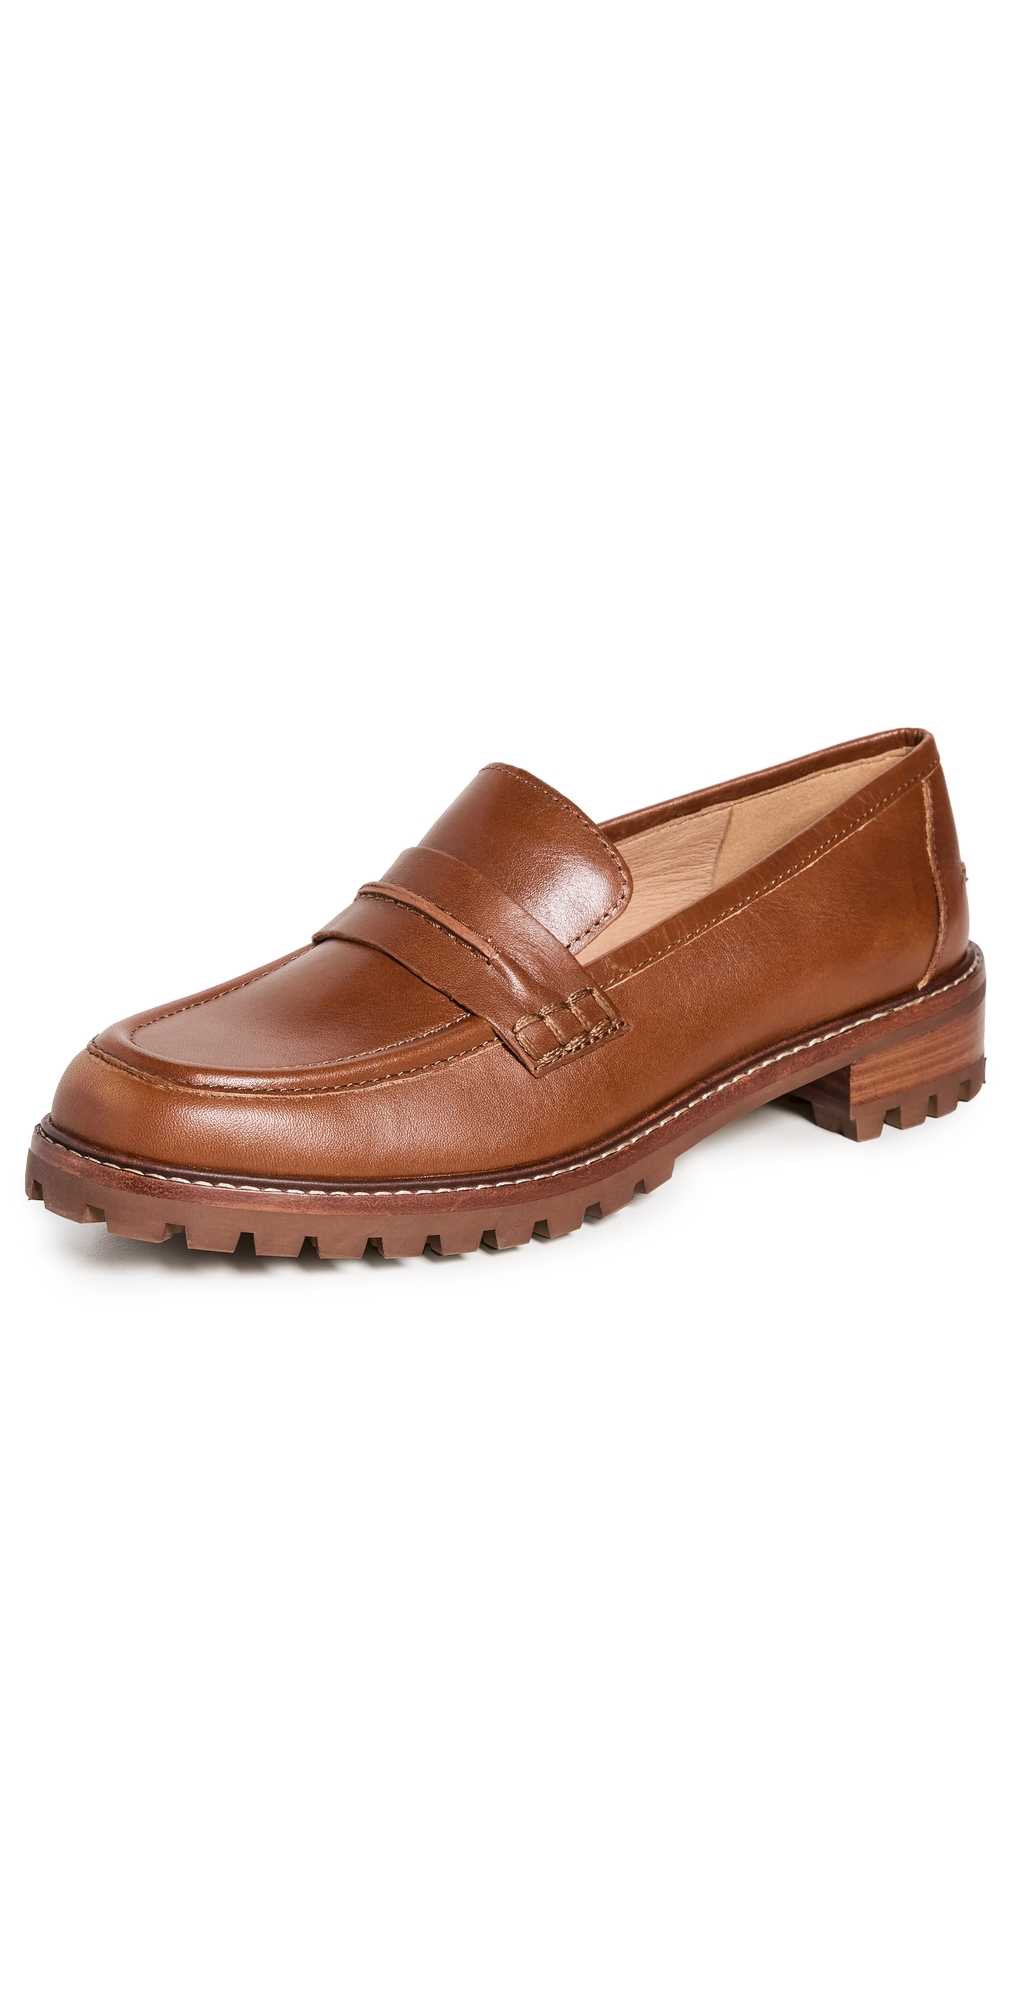 Madewell The Corinne Lugsole Loafers Dried Maple 5.5